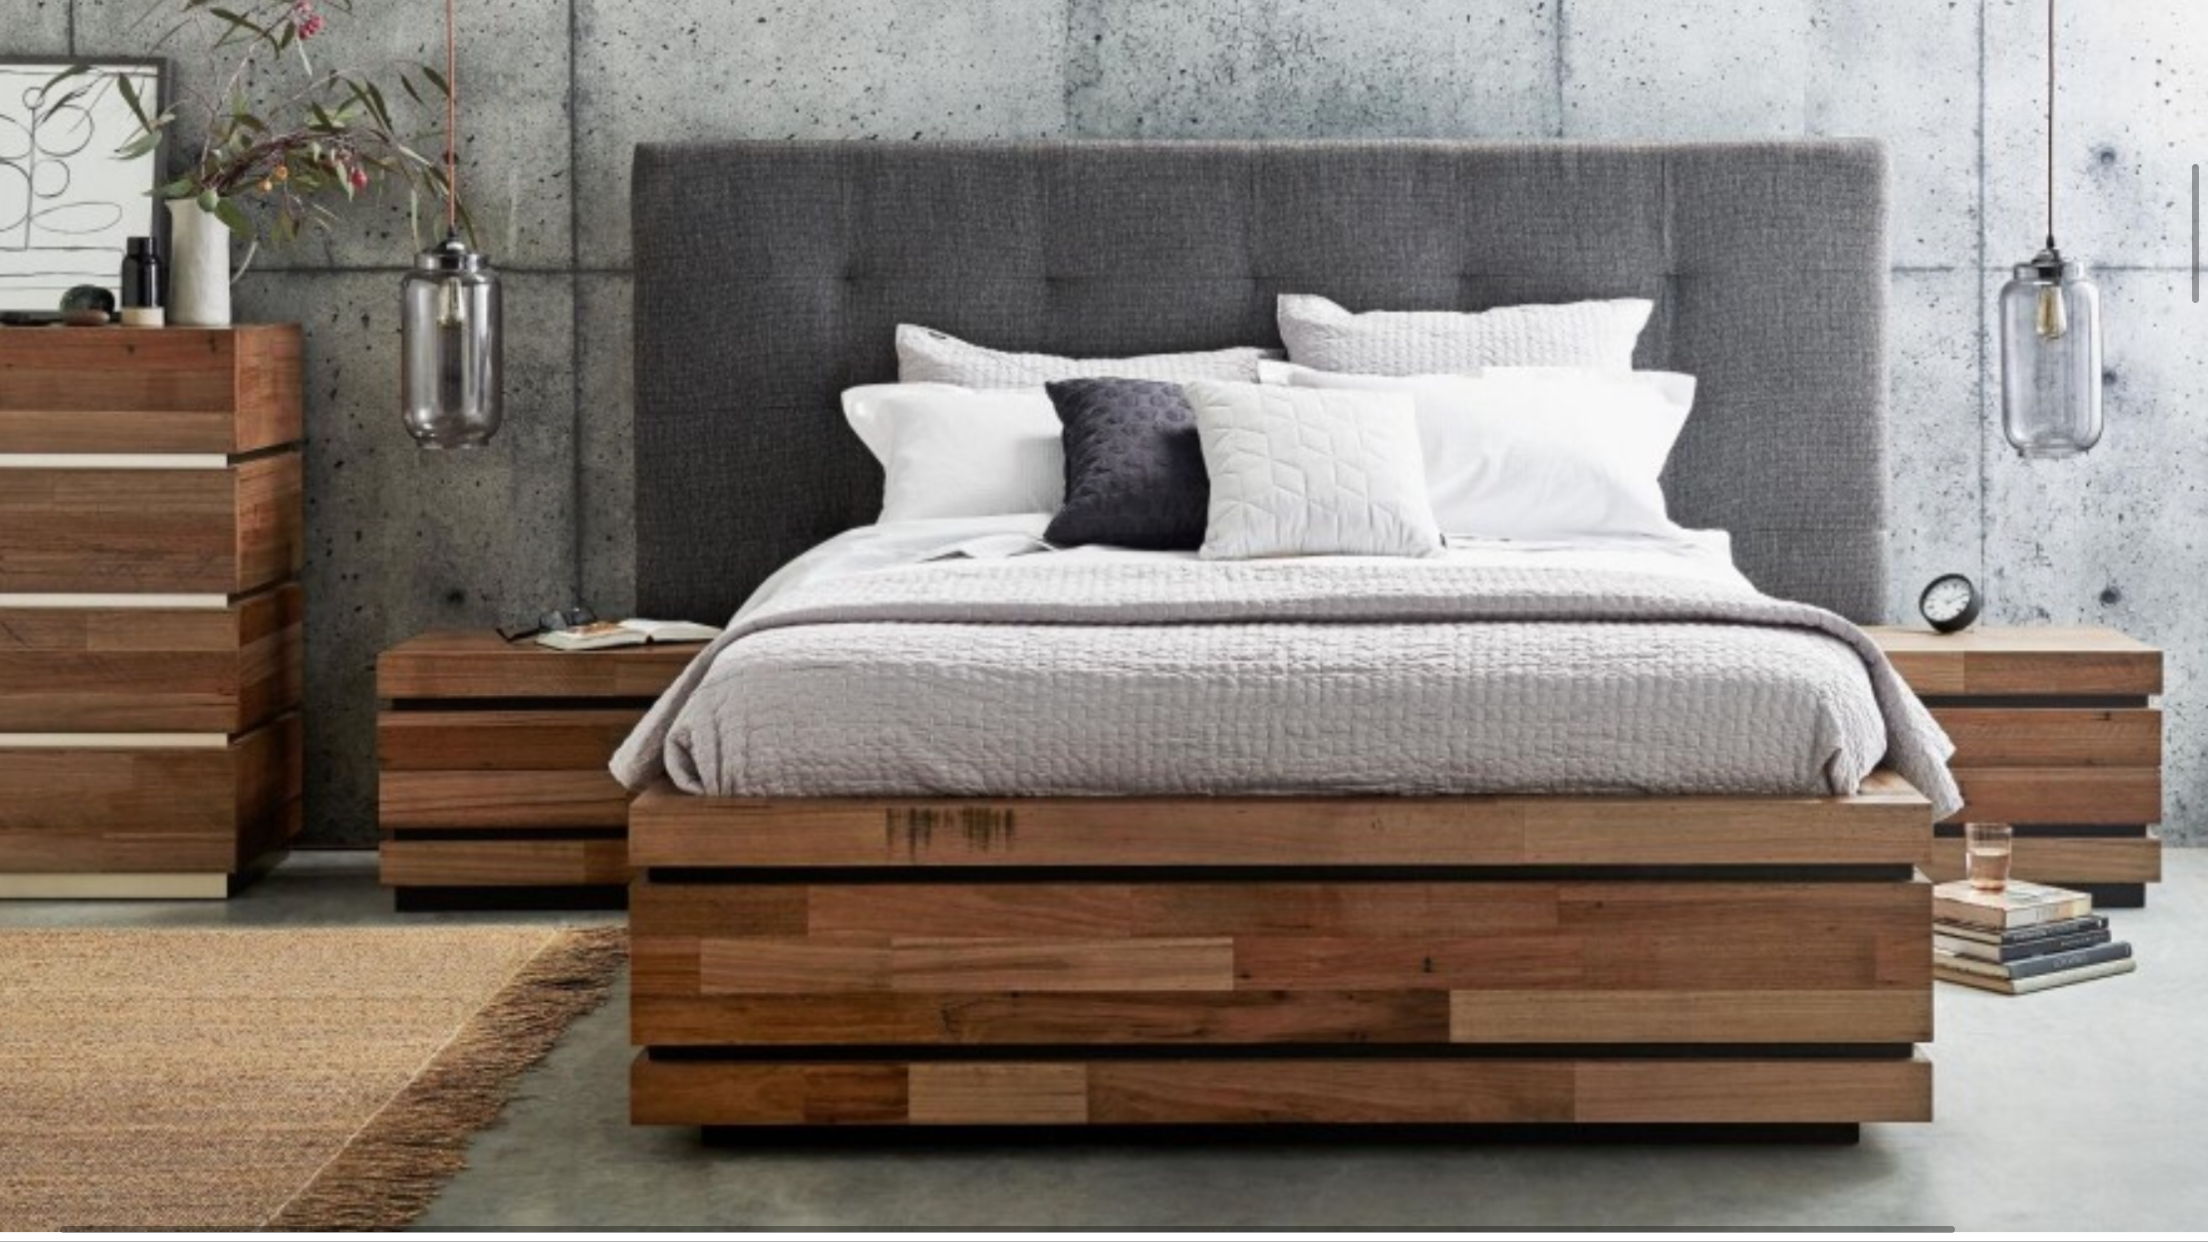 Bedroom Furniture Wooden Bed Frame Vs, Fabric And Wood Bed Frame